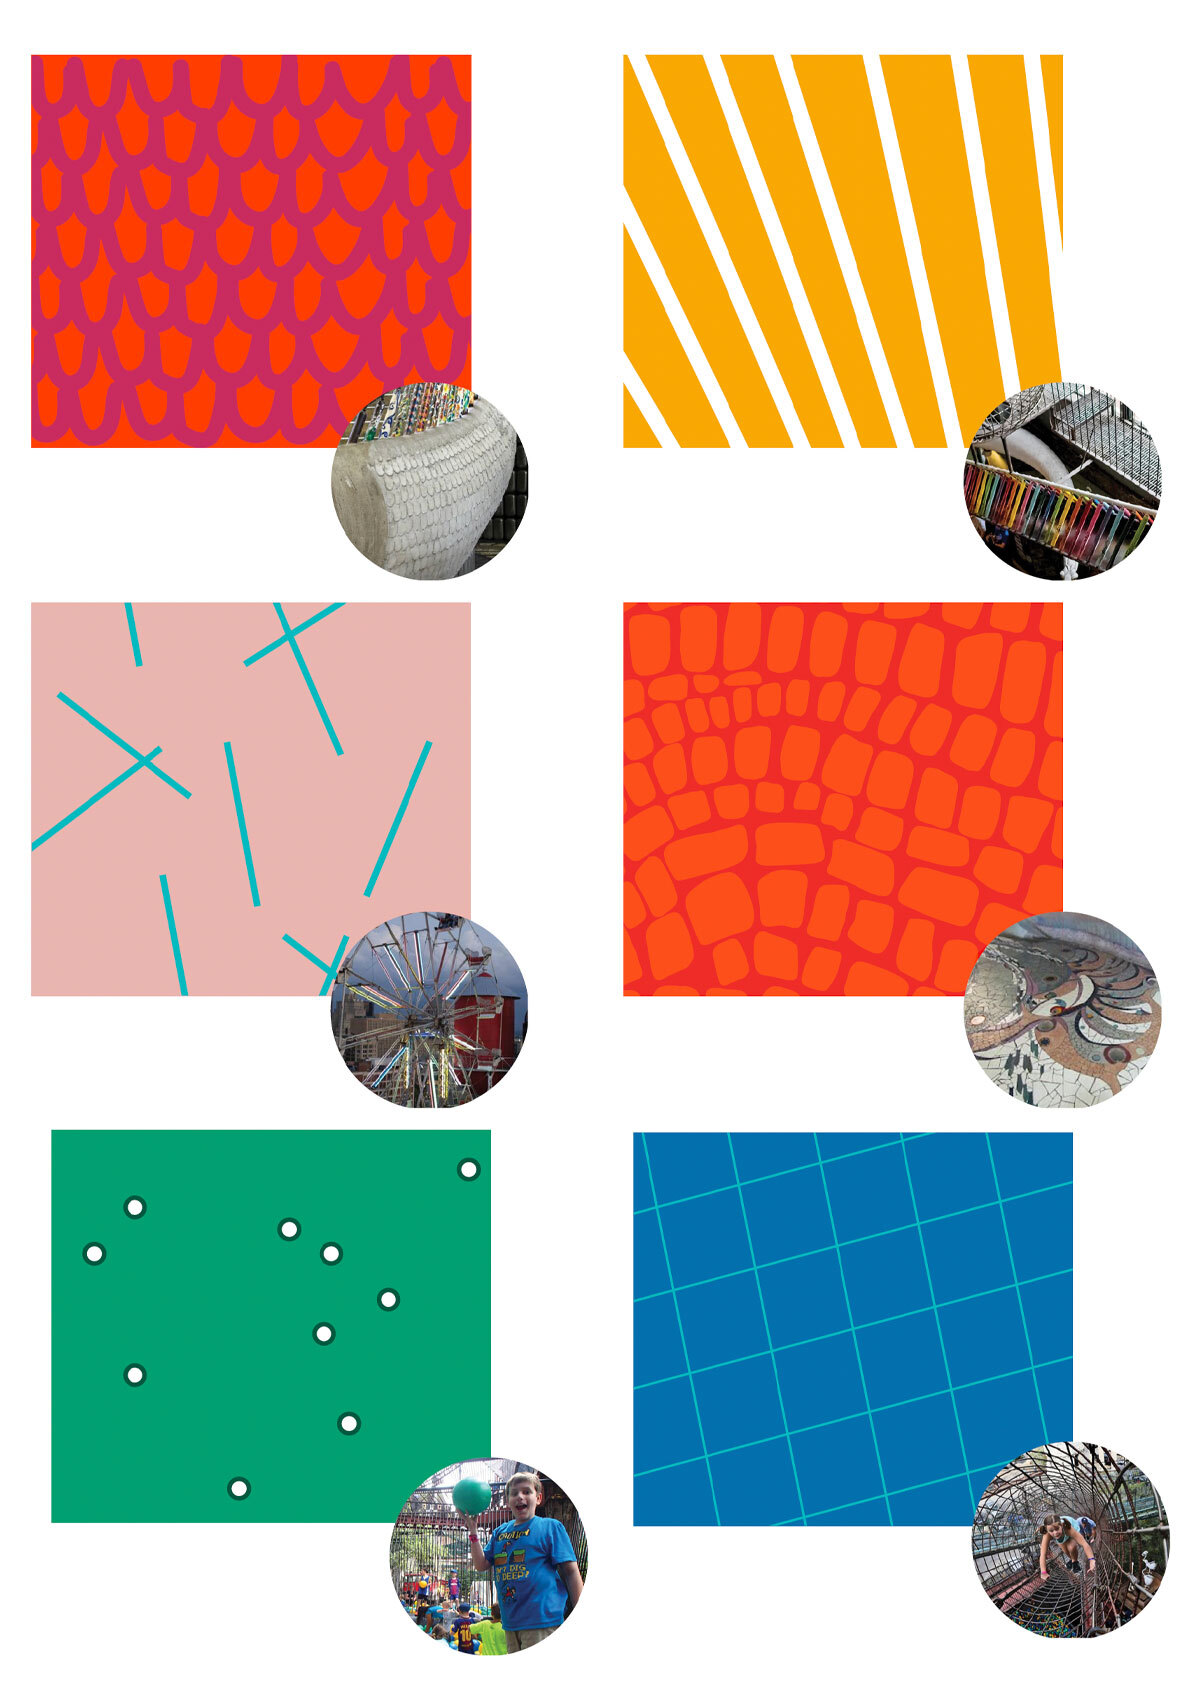 City Museum brand patterns inspired by exhibits